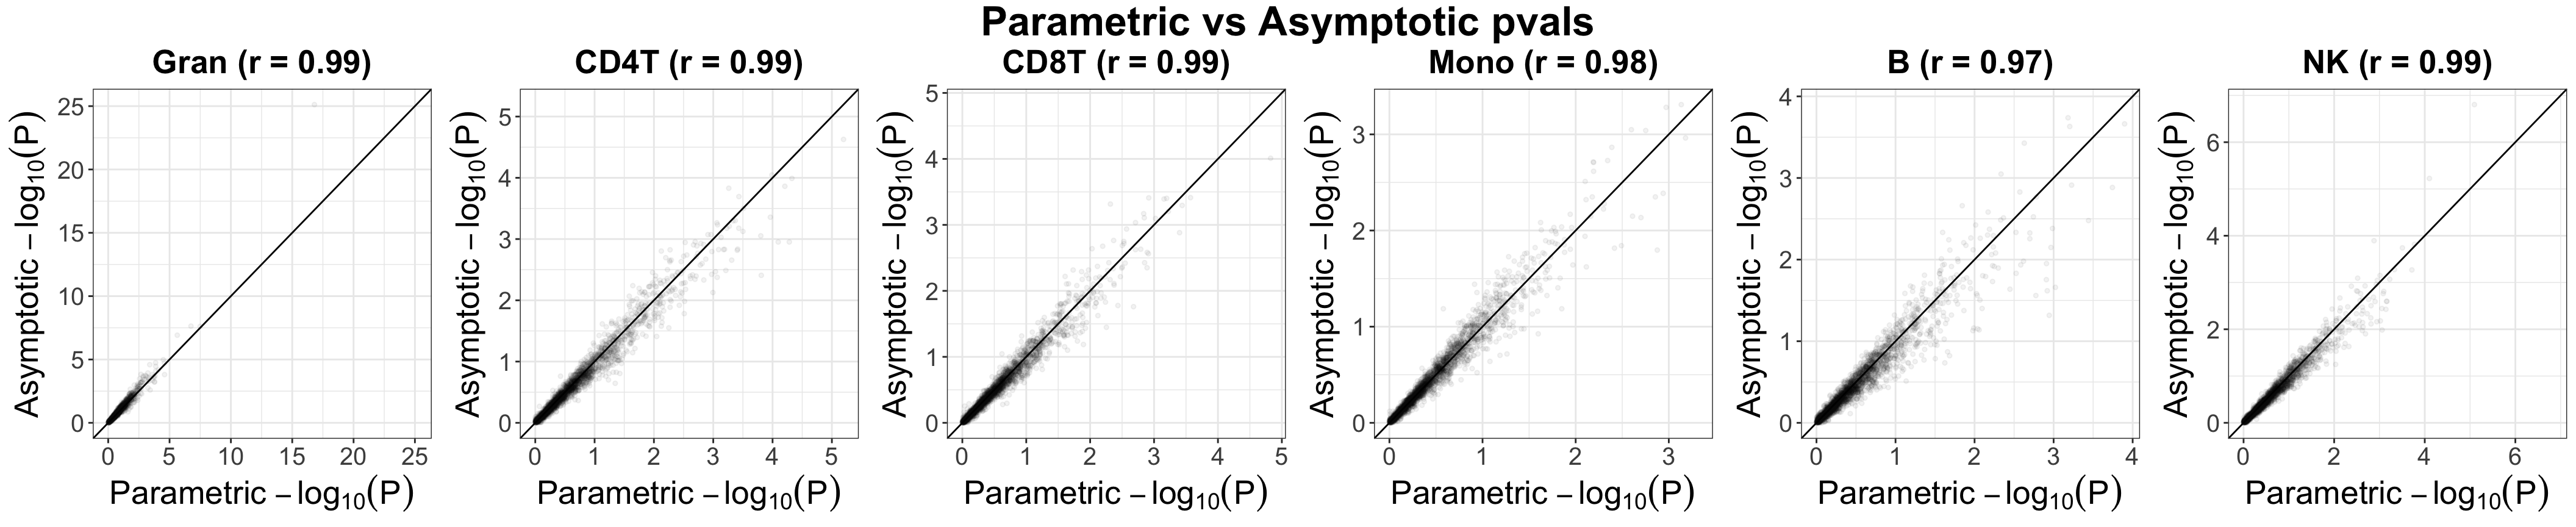 Evaluation of Unico’s asymptotically-derived p-values under non-parametric testing       for cell-type level differential methylation with age in whole-blood dataset (Liu et al.). Presented are        scatter plots showing log-transformed p-values under the assumption that methylation levels     are normally distributed (“Parametric”) versus the corresponding log-transformed p-values of        a non-parametric test (“Asymptotic”).